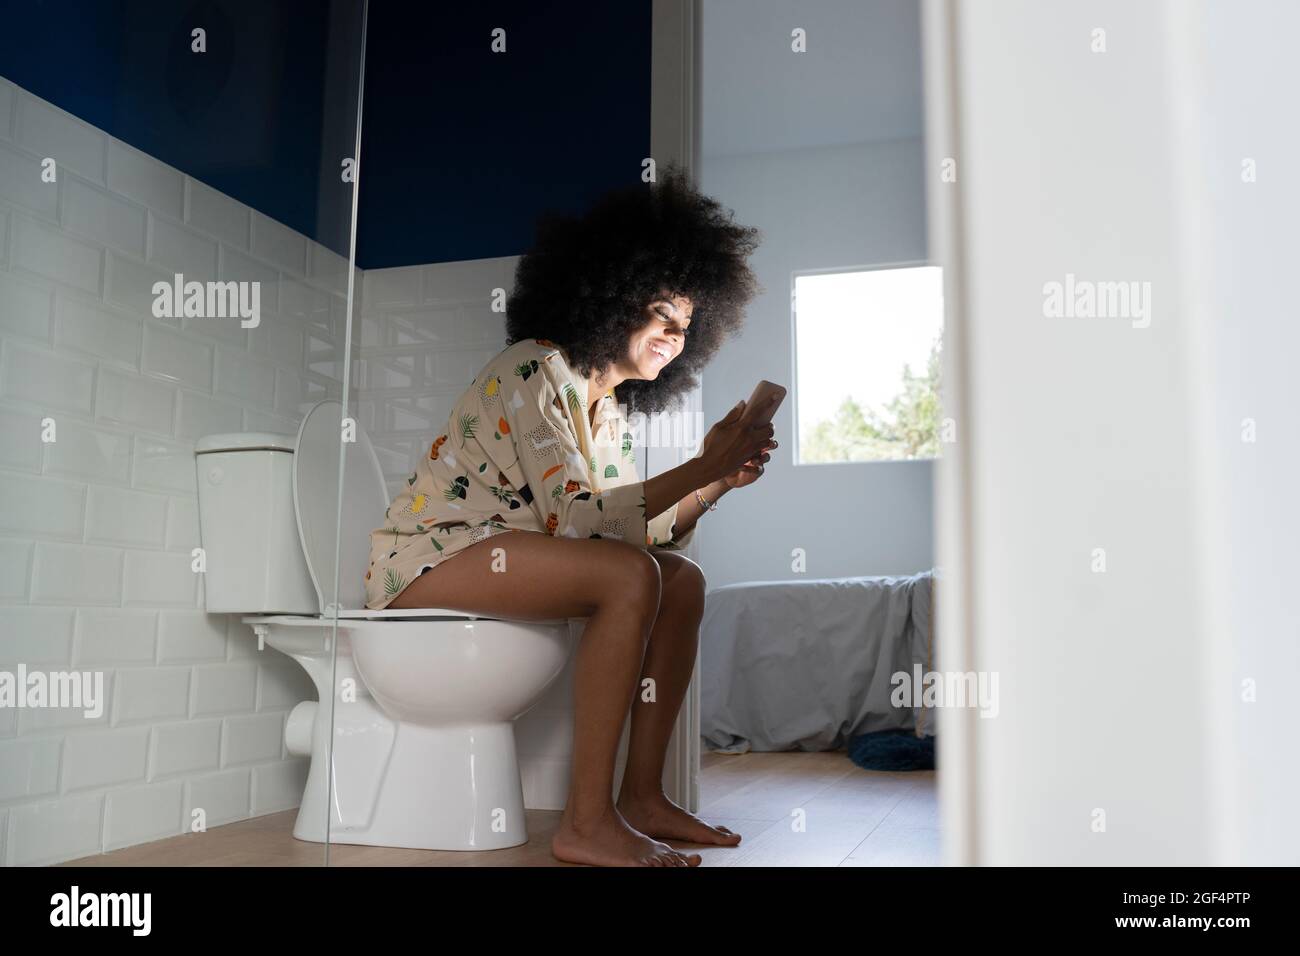 Smiling woman using smart phone while sitting on toilet seat at home Stock Photo